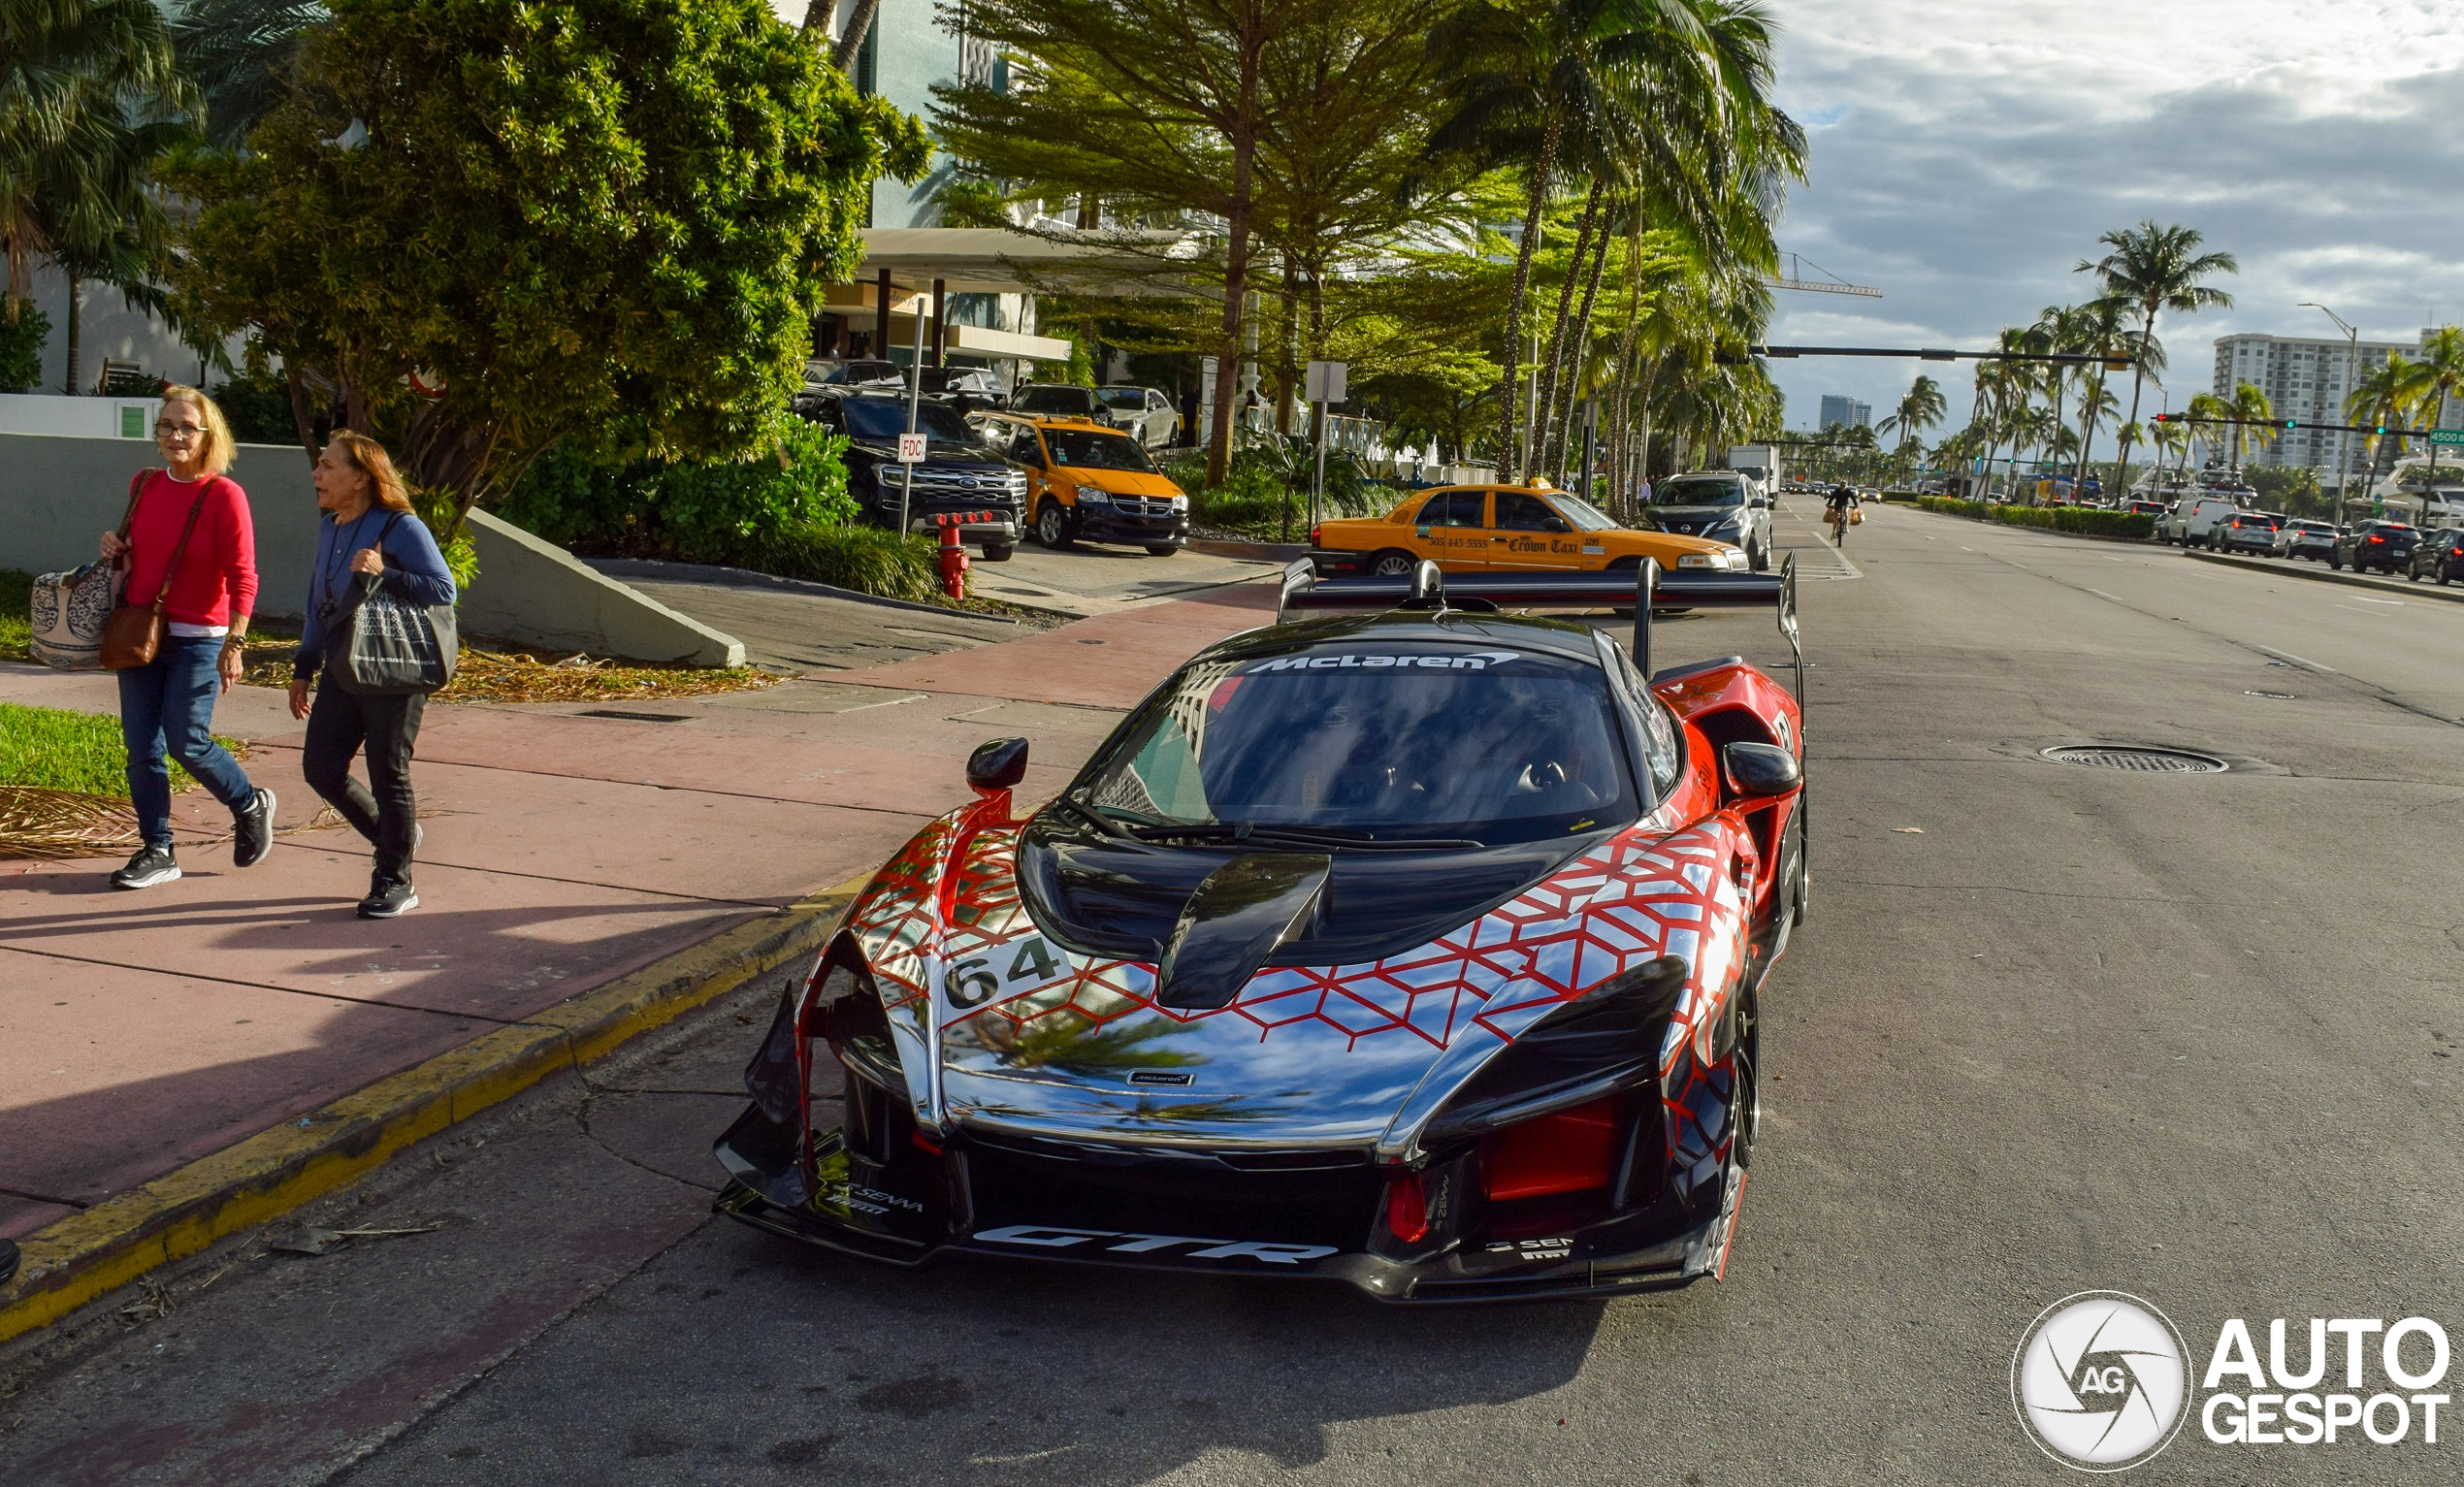 A New Sighting of the Senna GTR in the USA